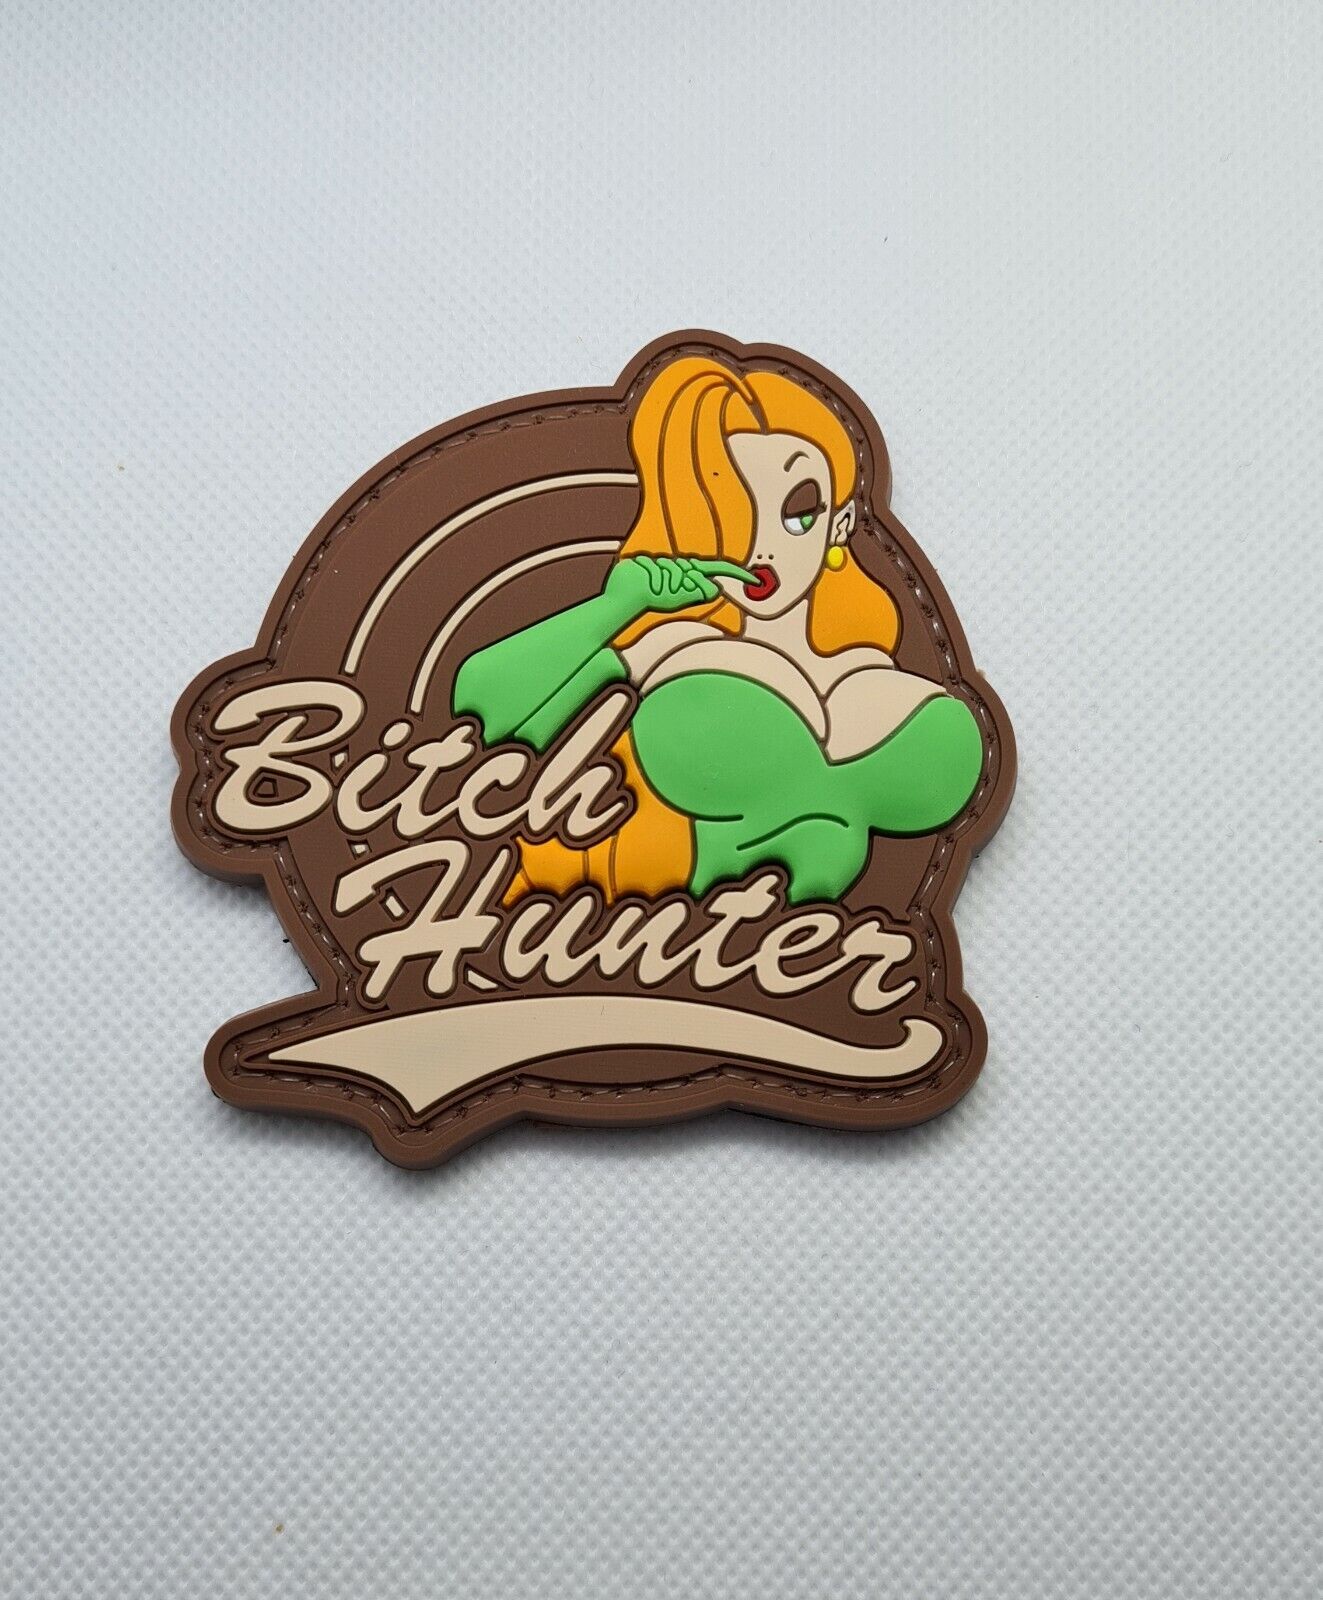 BITCH HUNTER Titties 3D PVC Tactical Morale Patch – Hook Backed